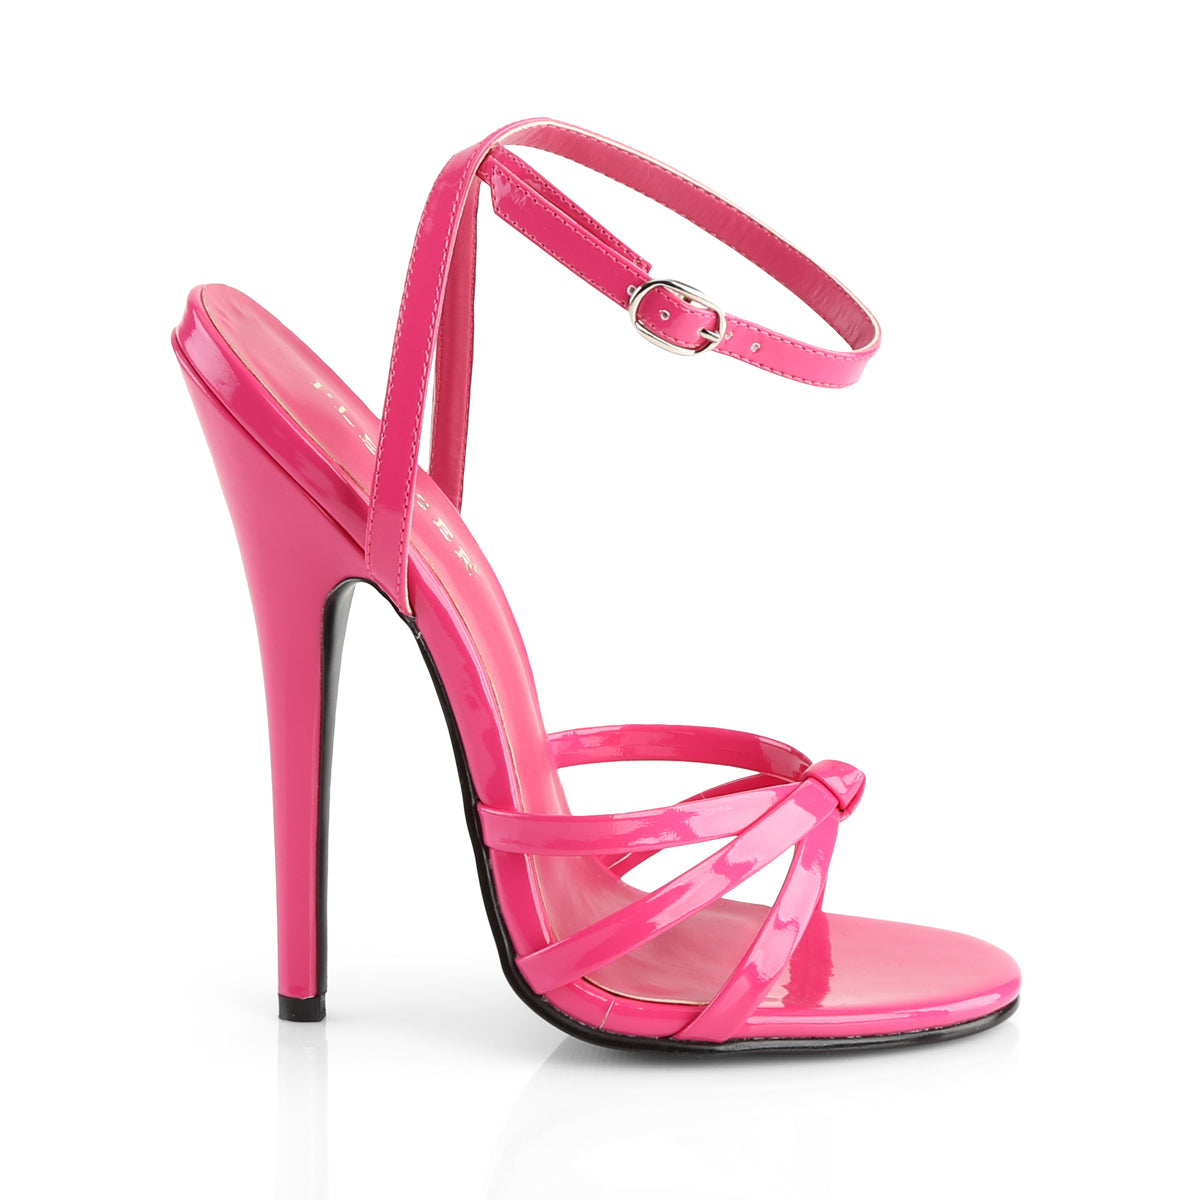 DOMINA-108 Hot Pink Patent Ankle High Heel  Multi view 2